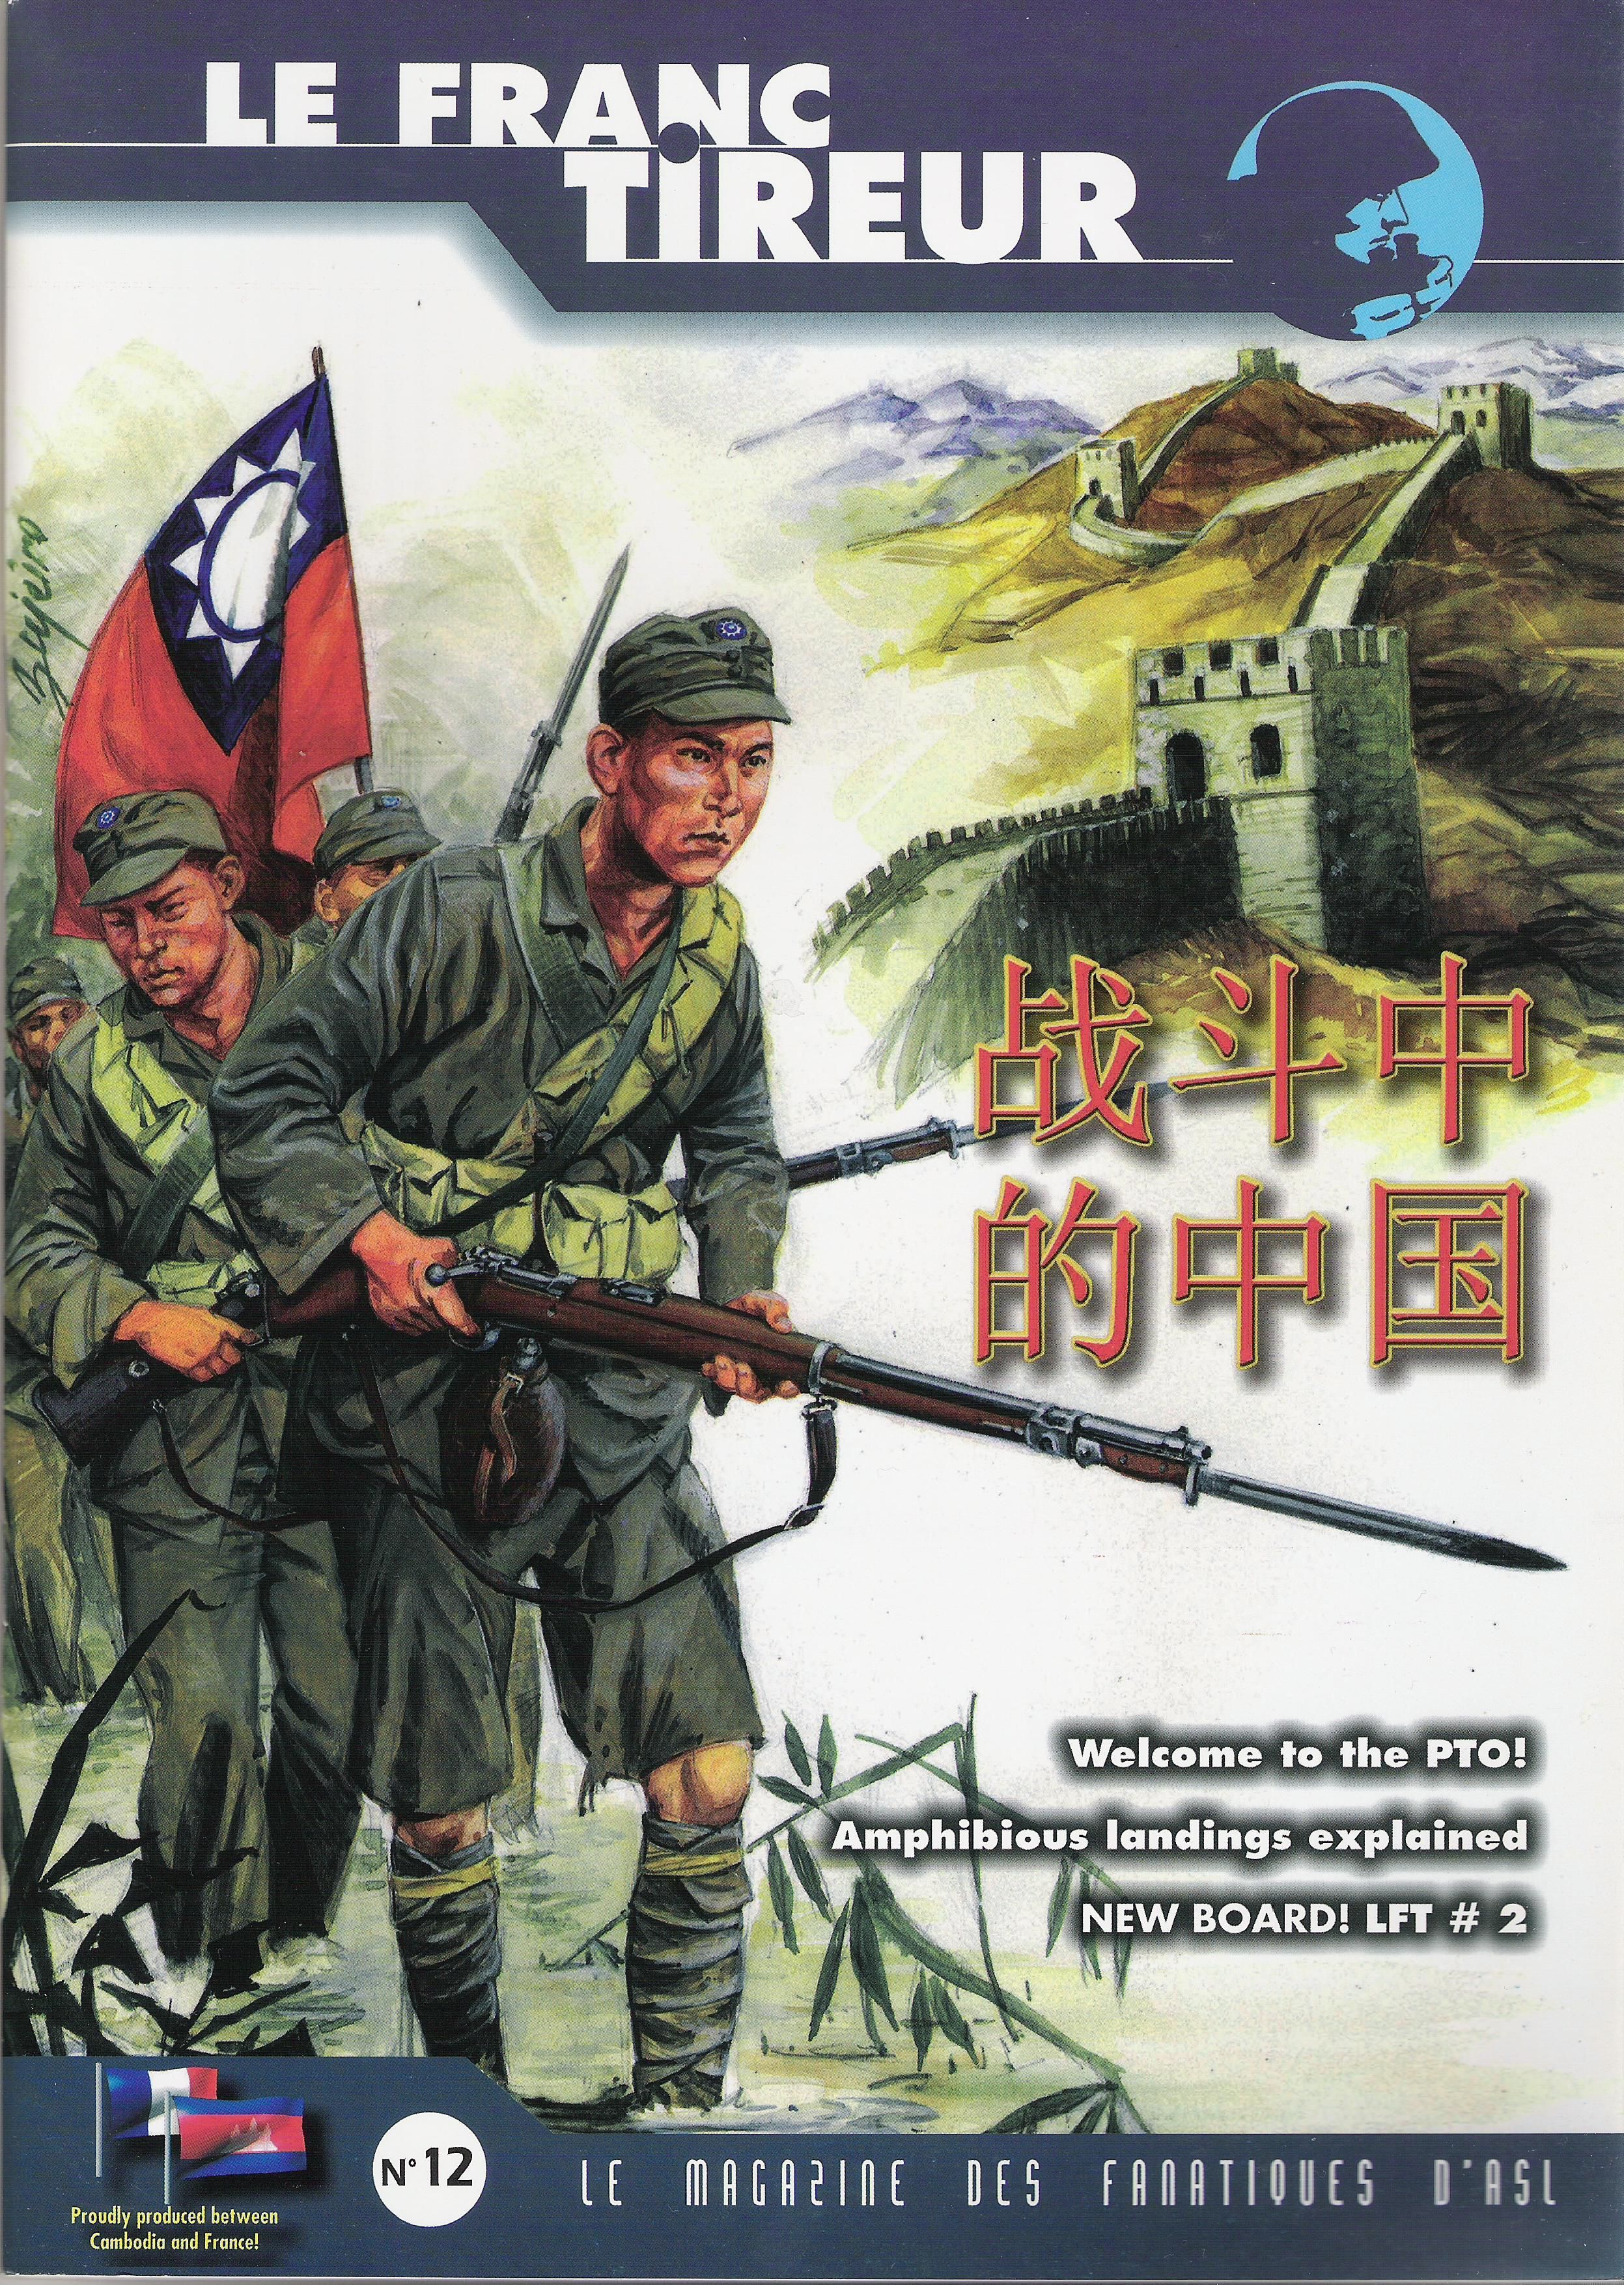 Le Franc Tireur #12: PTO and Chinese Civil War for ASL